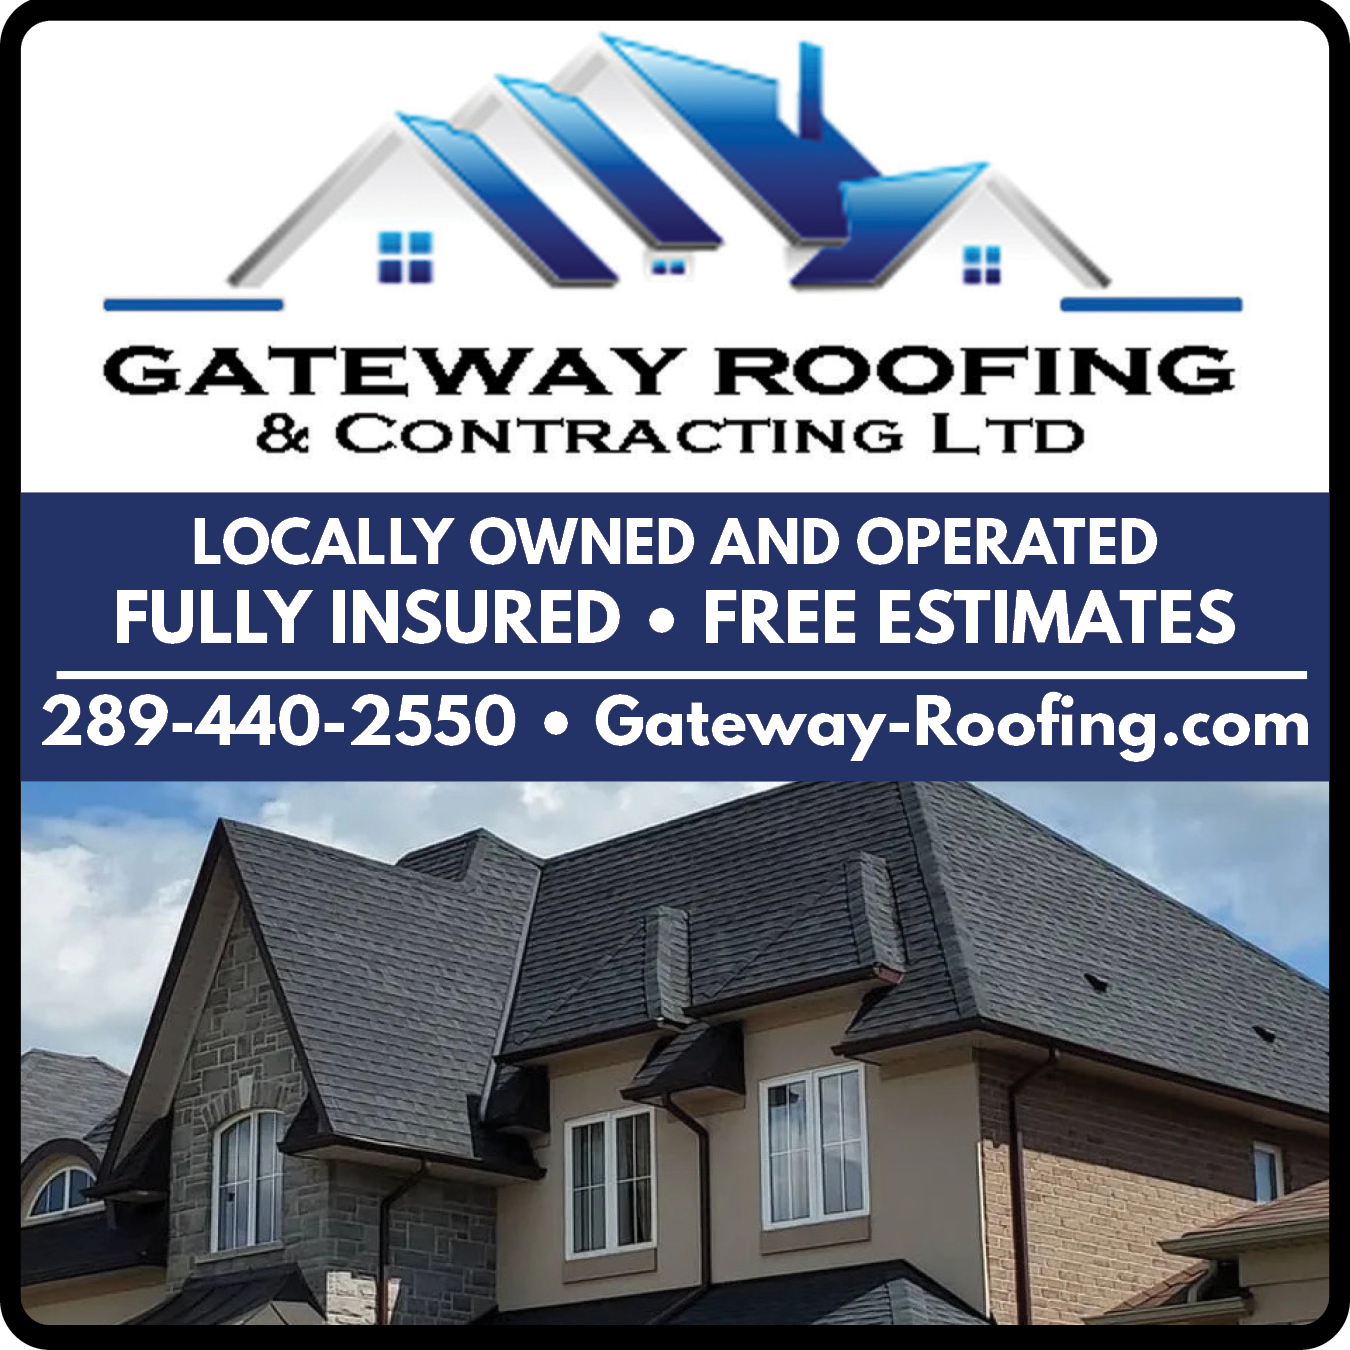 GATEWAY ROOFING